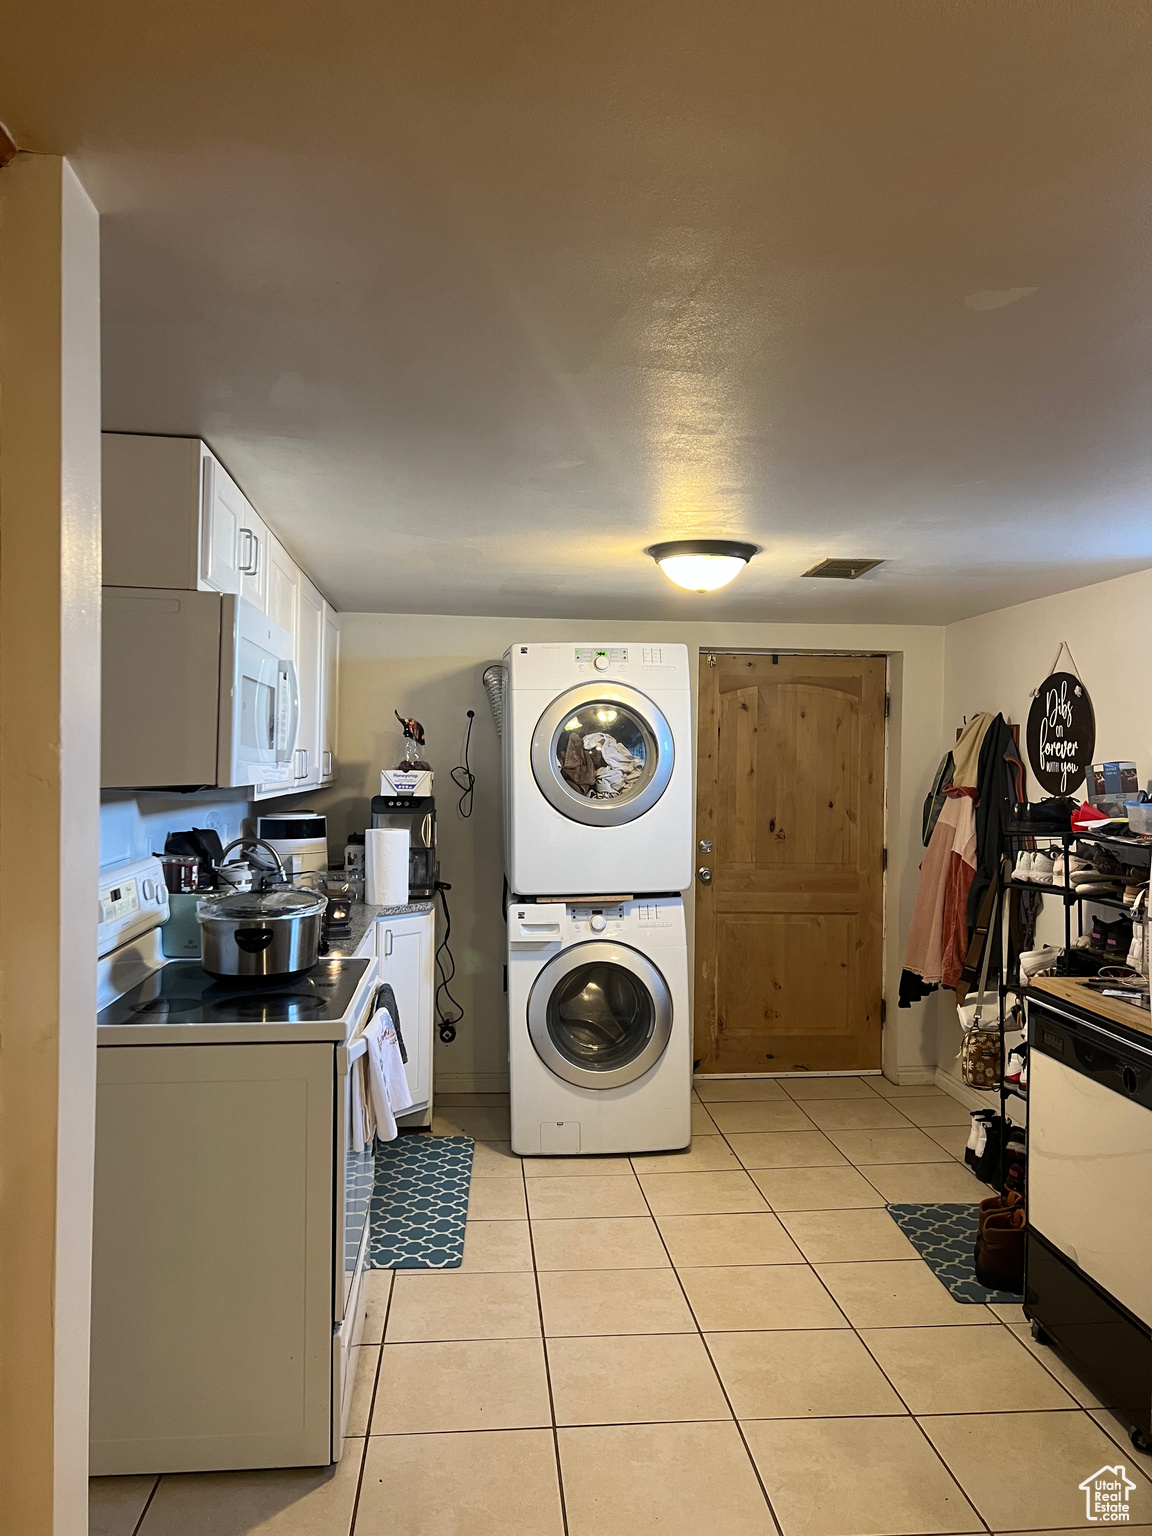 Kitchen with dishwashing machine, electric range oven, white cabinets, stacked washer / dryer, and light tile floors